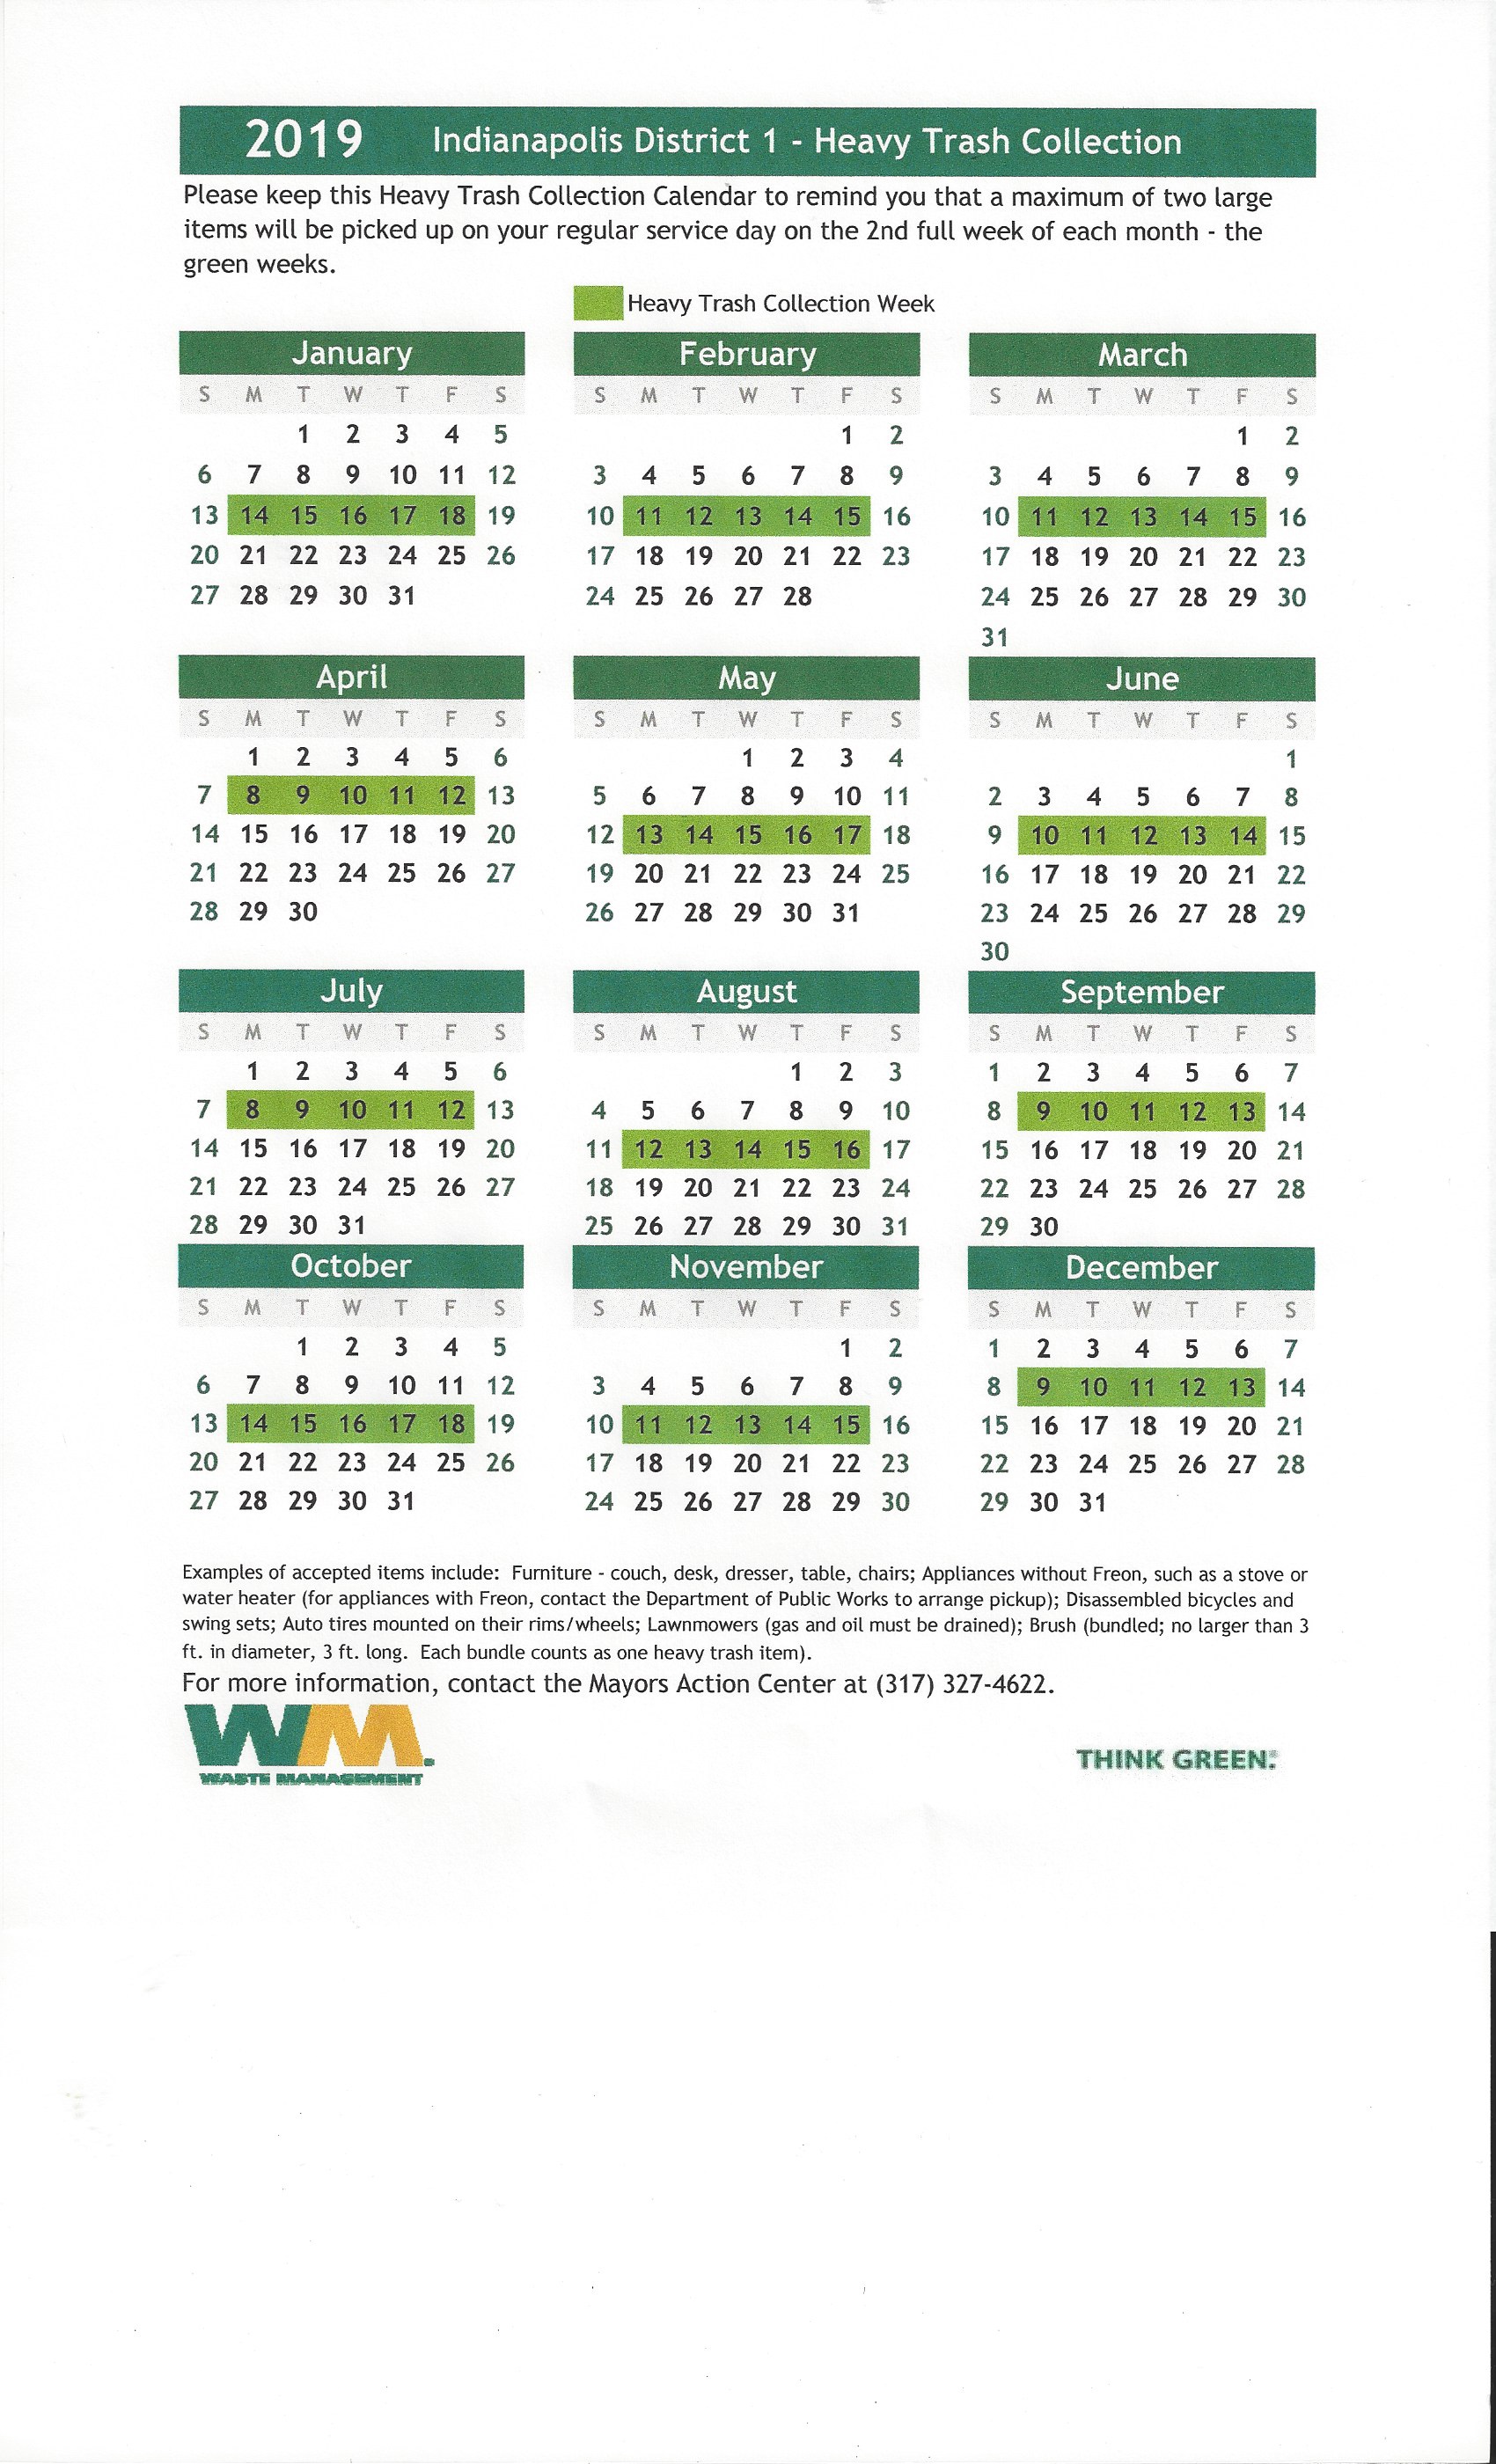 Waste Management for their 2019 Heavy Trash Pickup Schedule – Janice McHenry